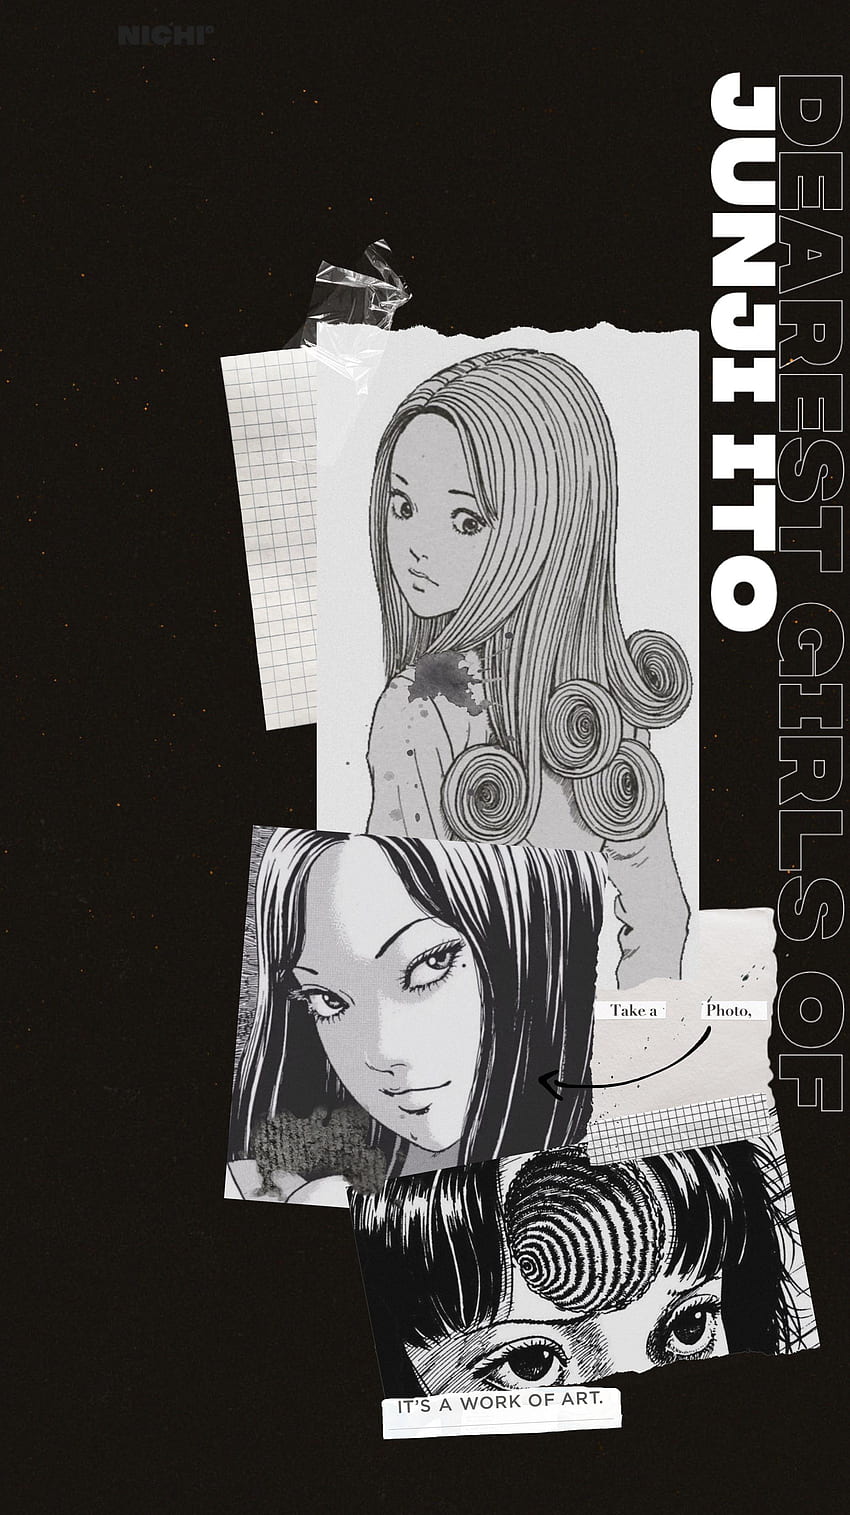 In The Spirit Of The New IOS Update, I Made A New For My Phone Ft. Some Of The Girls ! : R Junjiito, Junji Ito Manga HD phone wallpaper